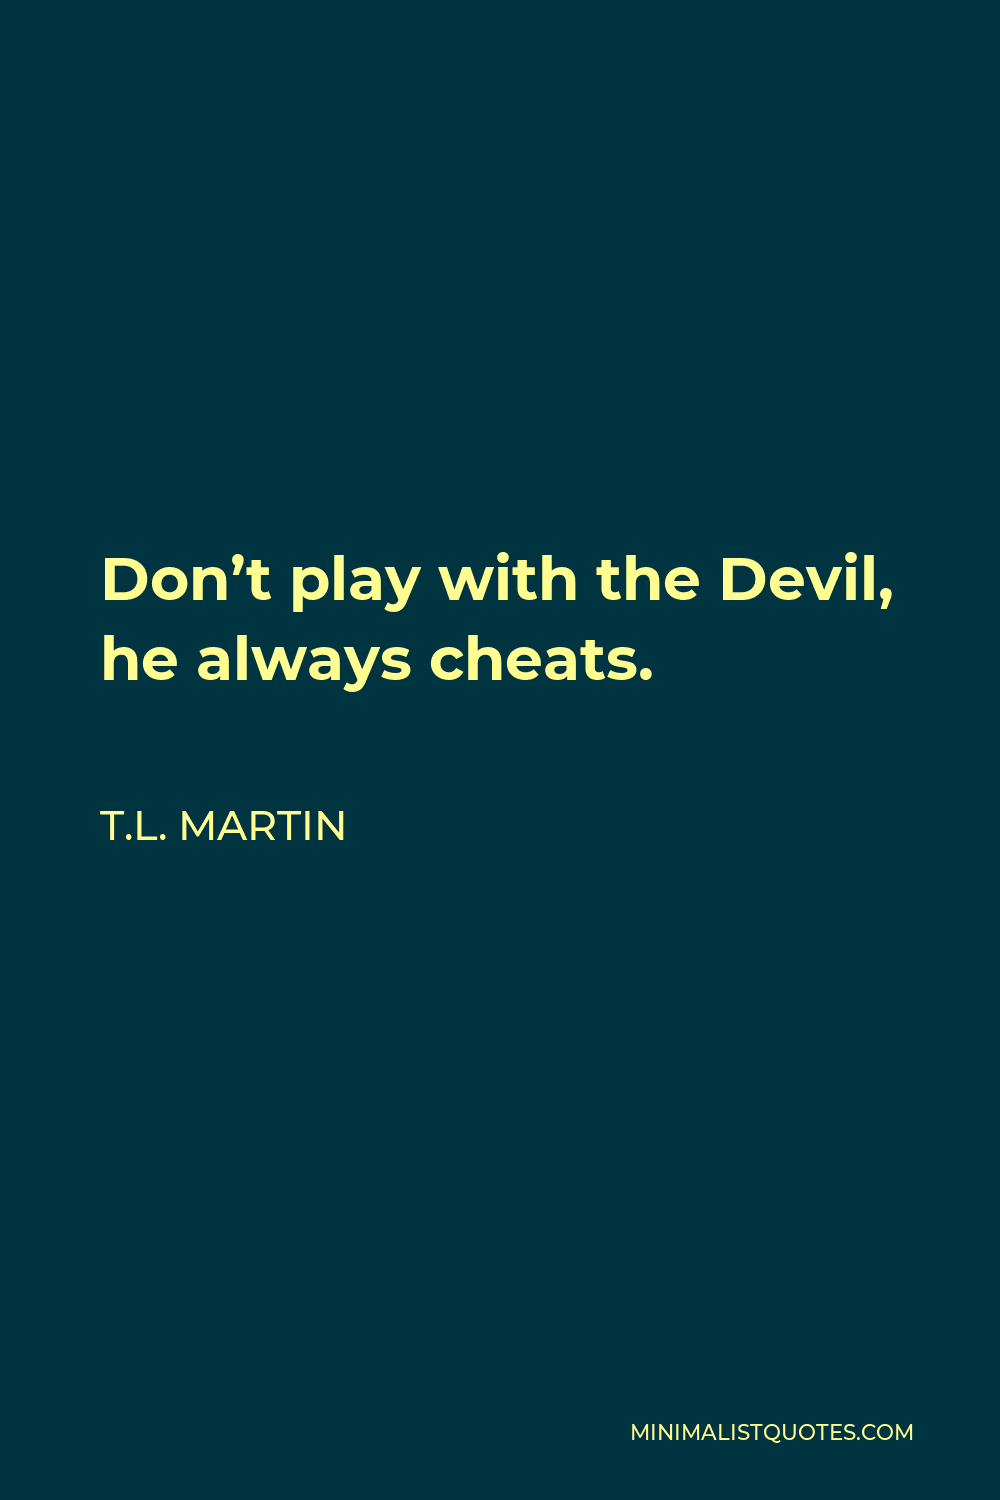 T.L. Martin Quote - Don’t play with the Devil, he always cheats.